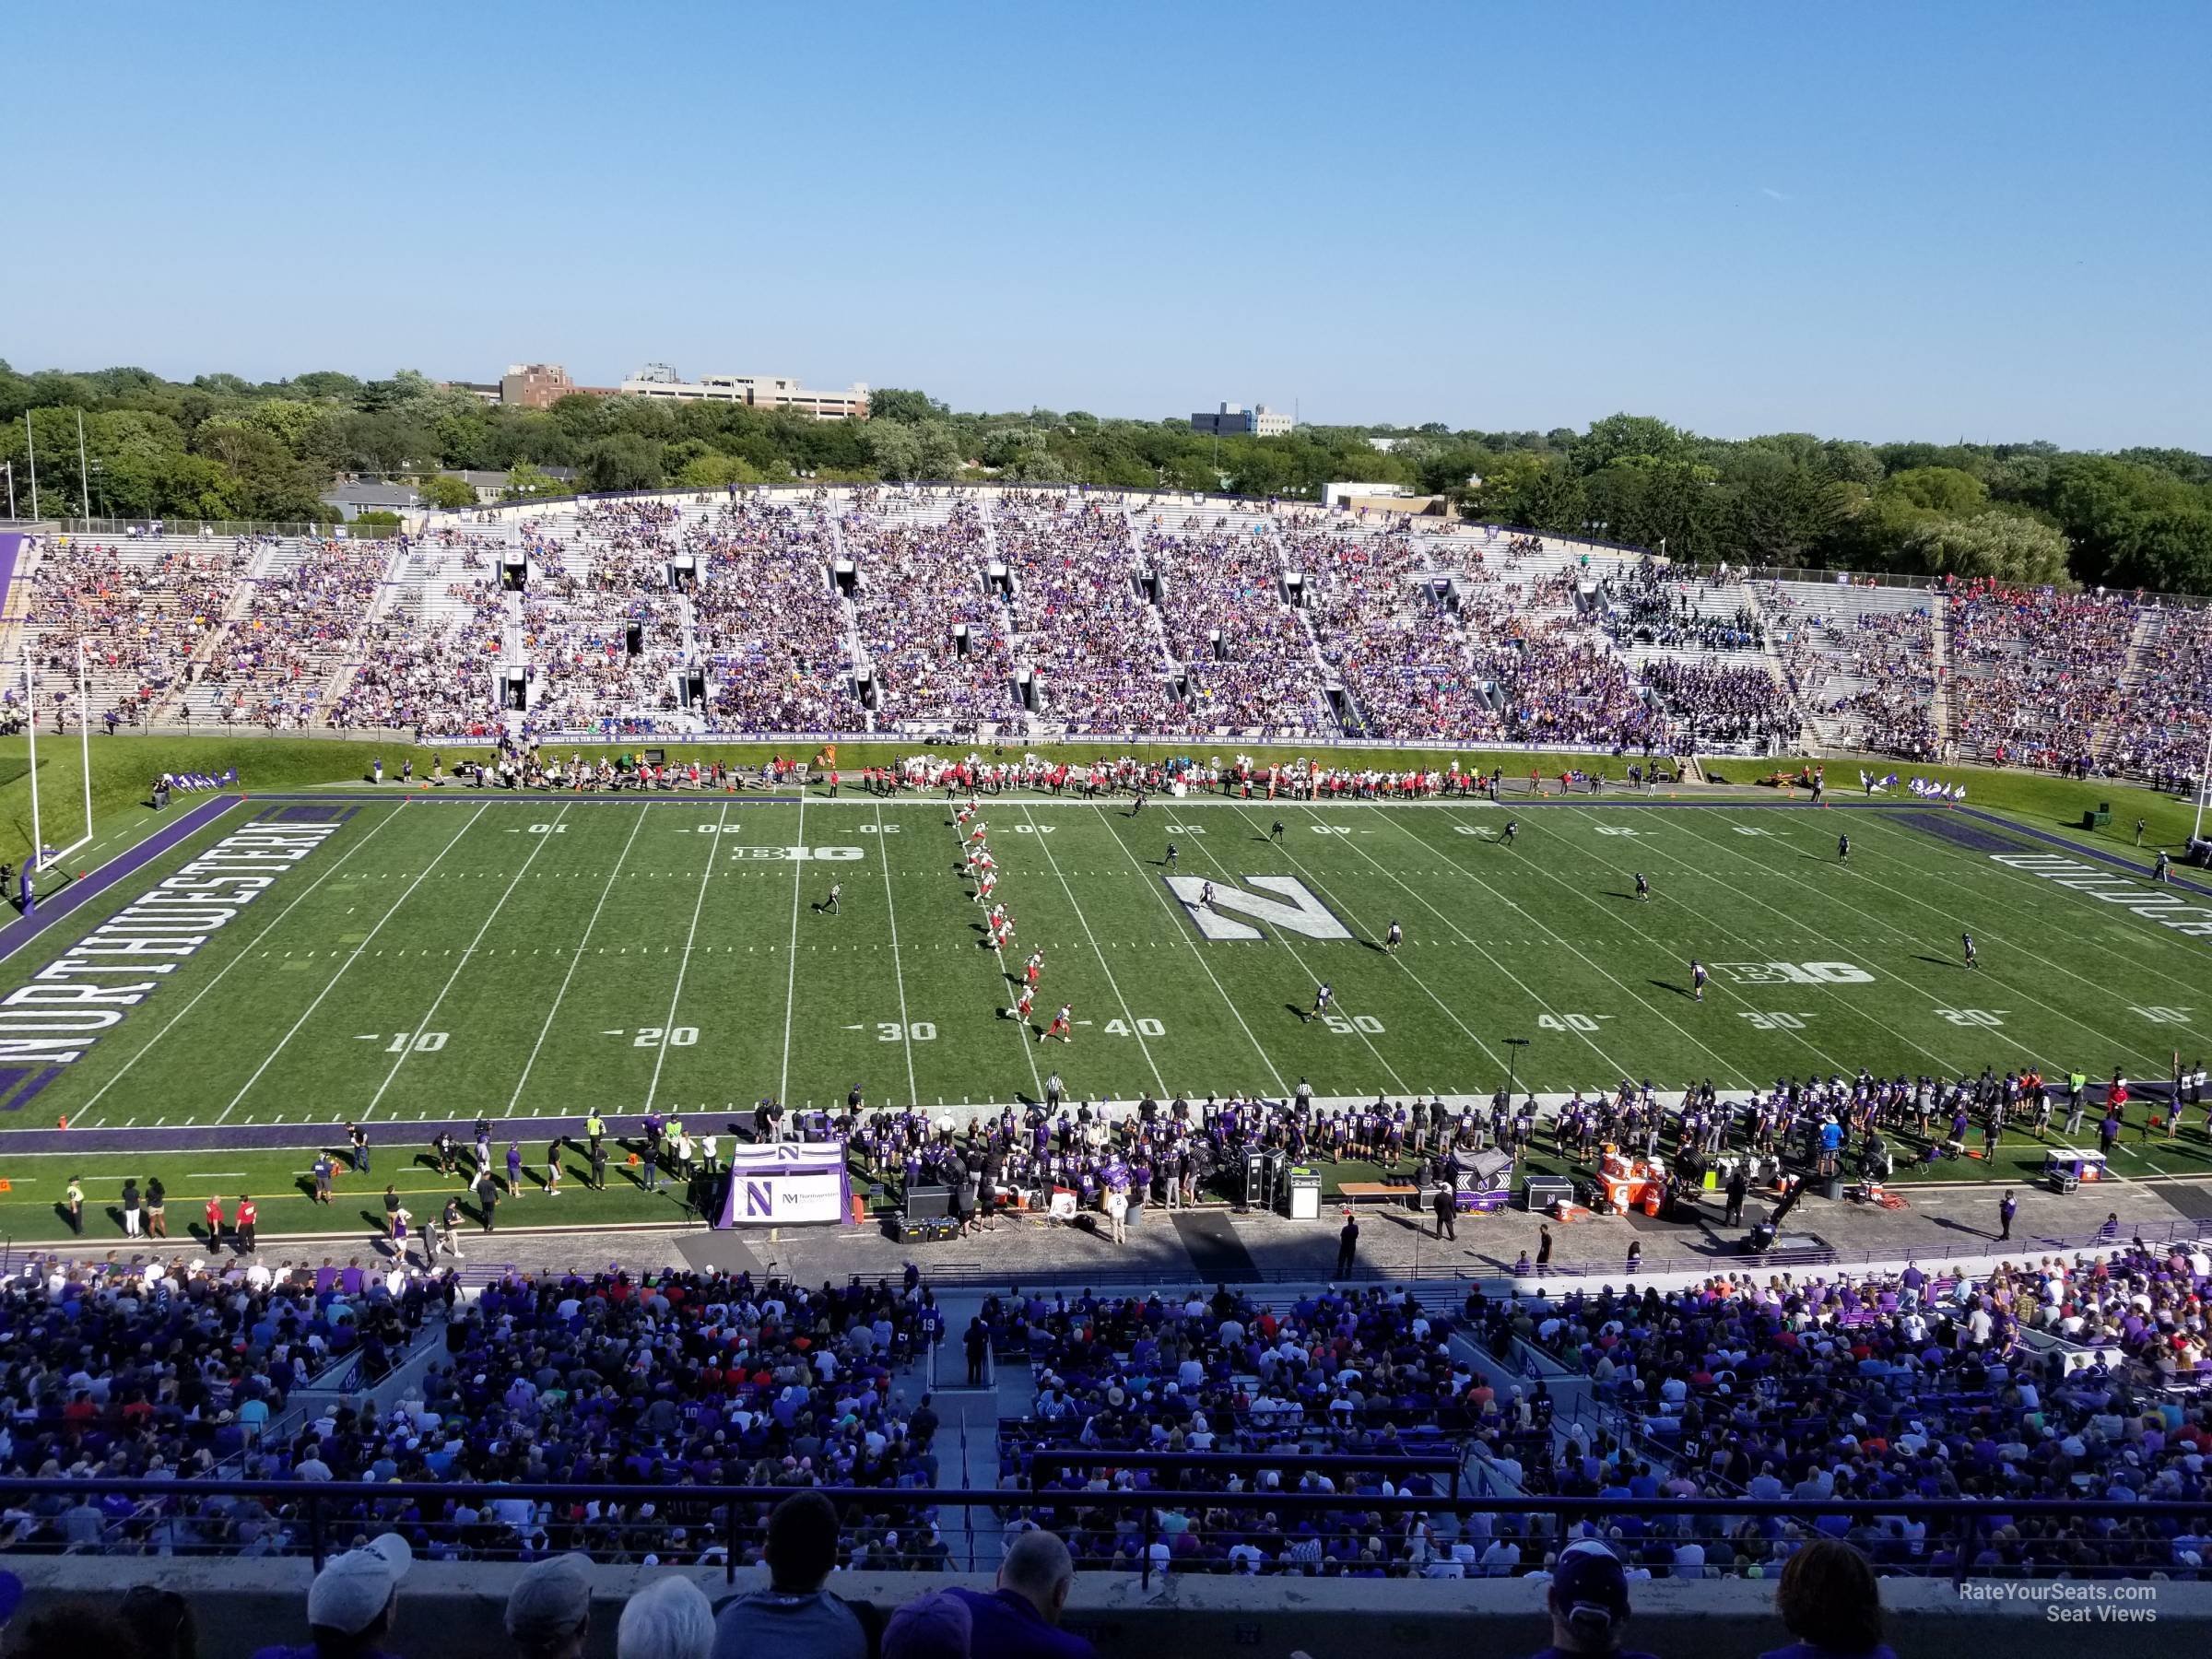 section 231, row 28 seat view  - ryan field